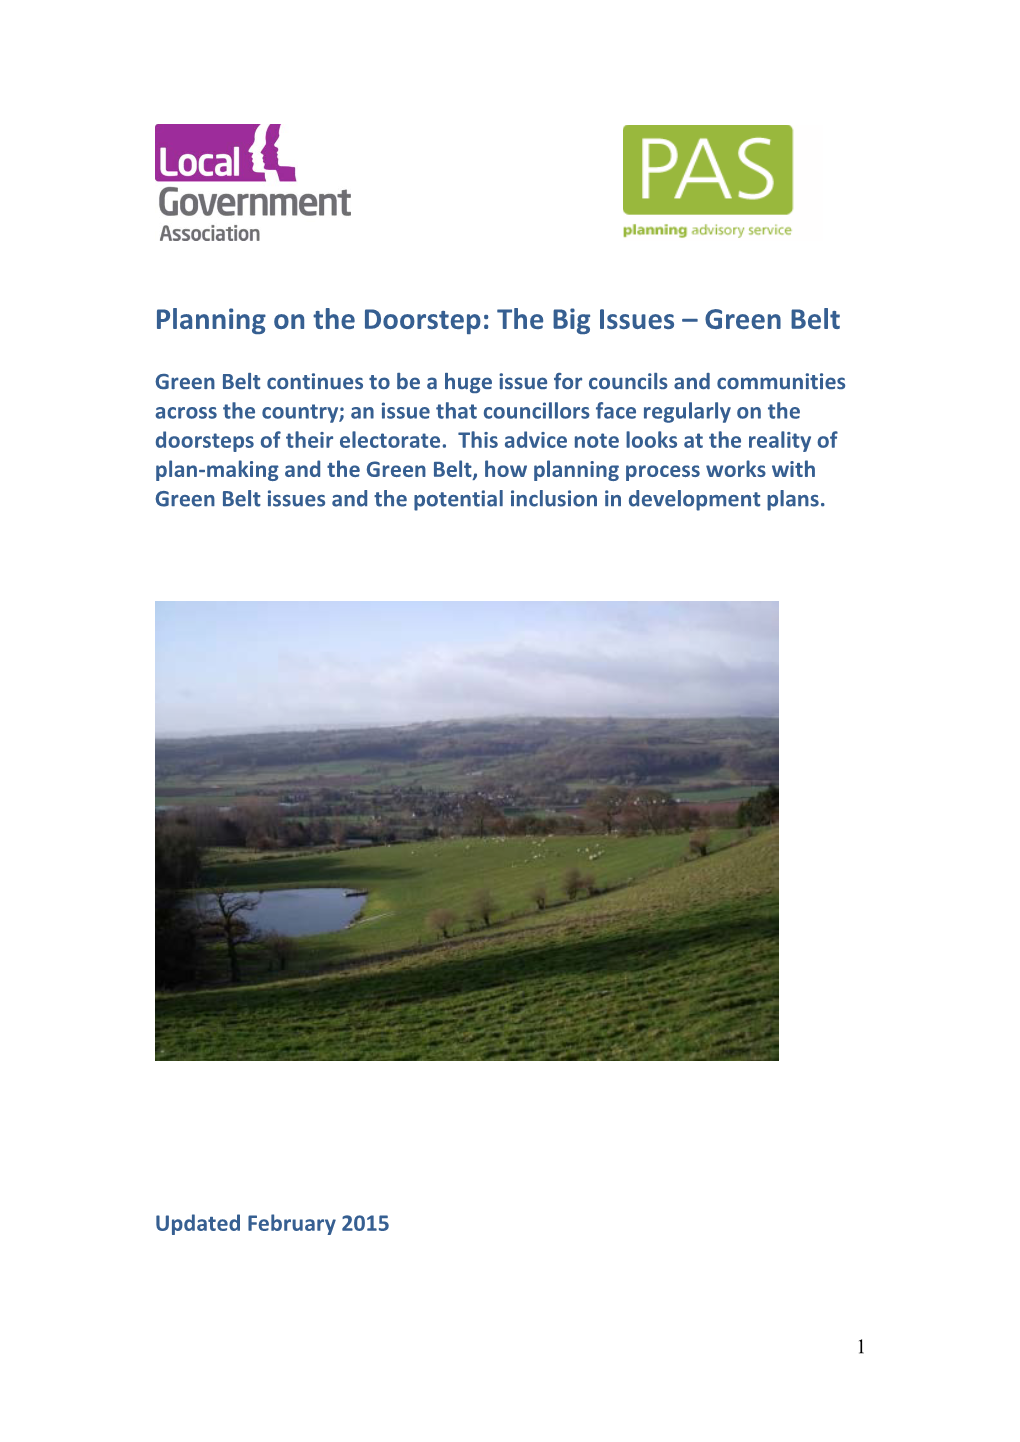 Planning on the Doorstep: the Big Issues – Green Belt